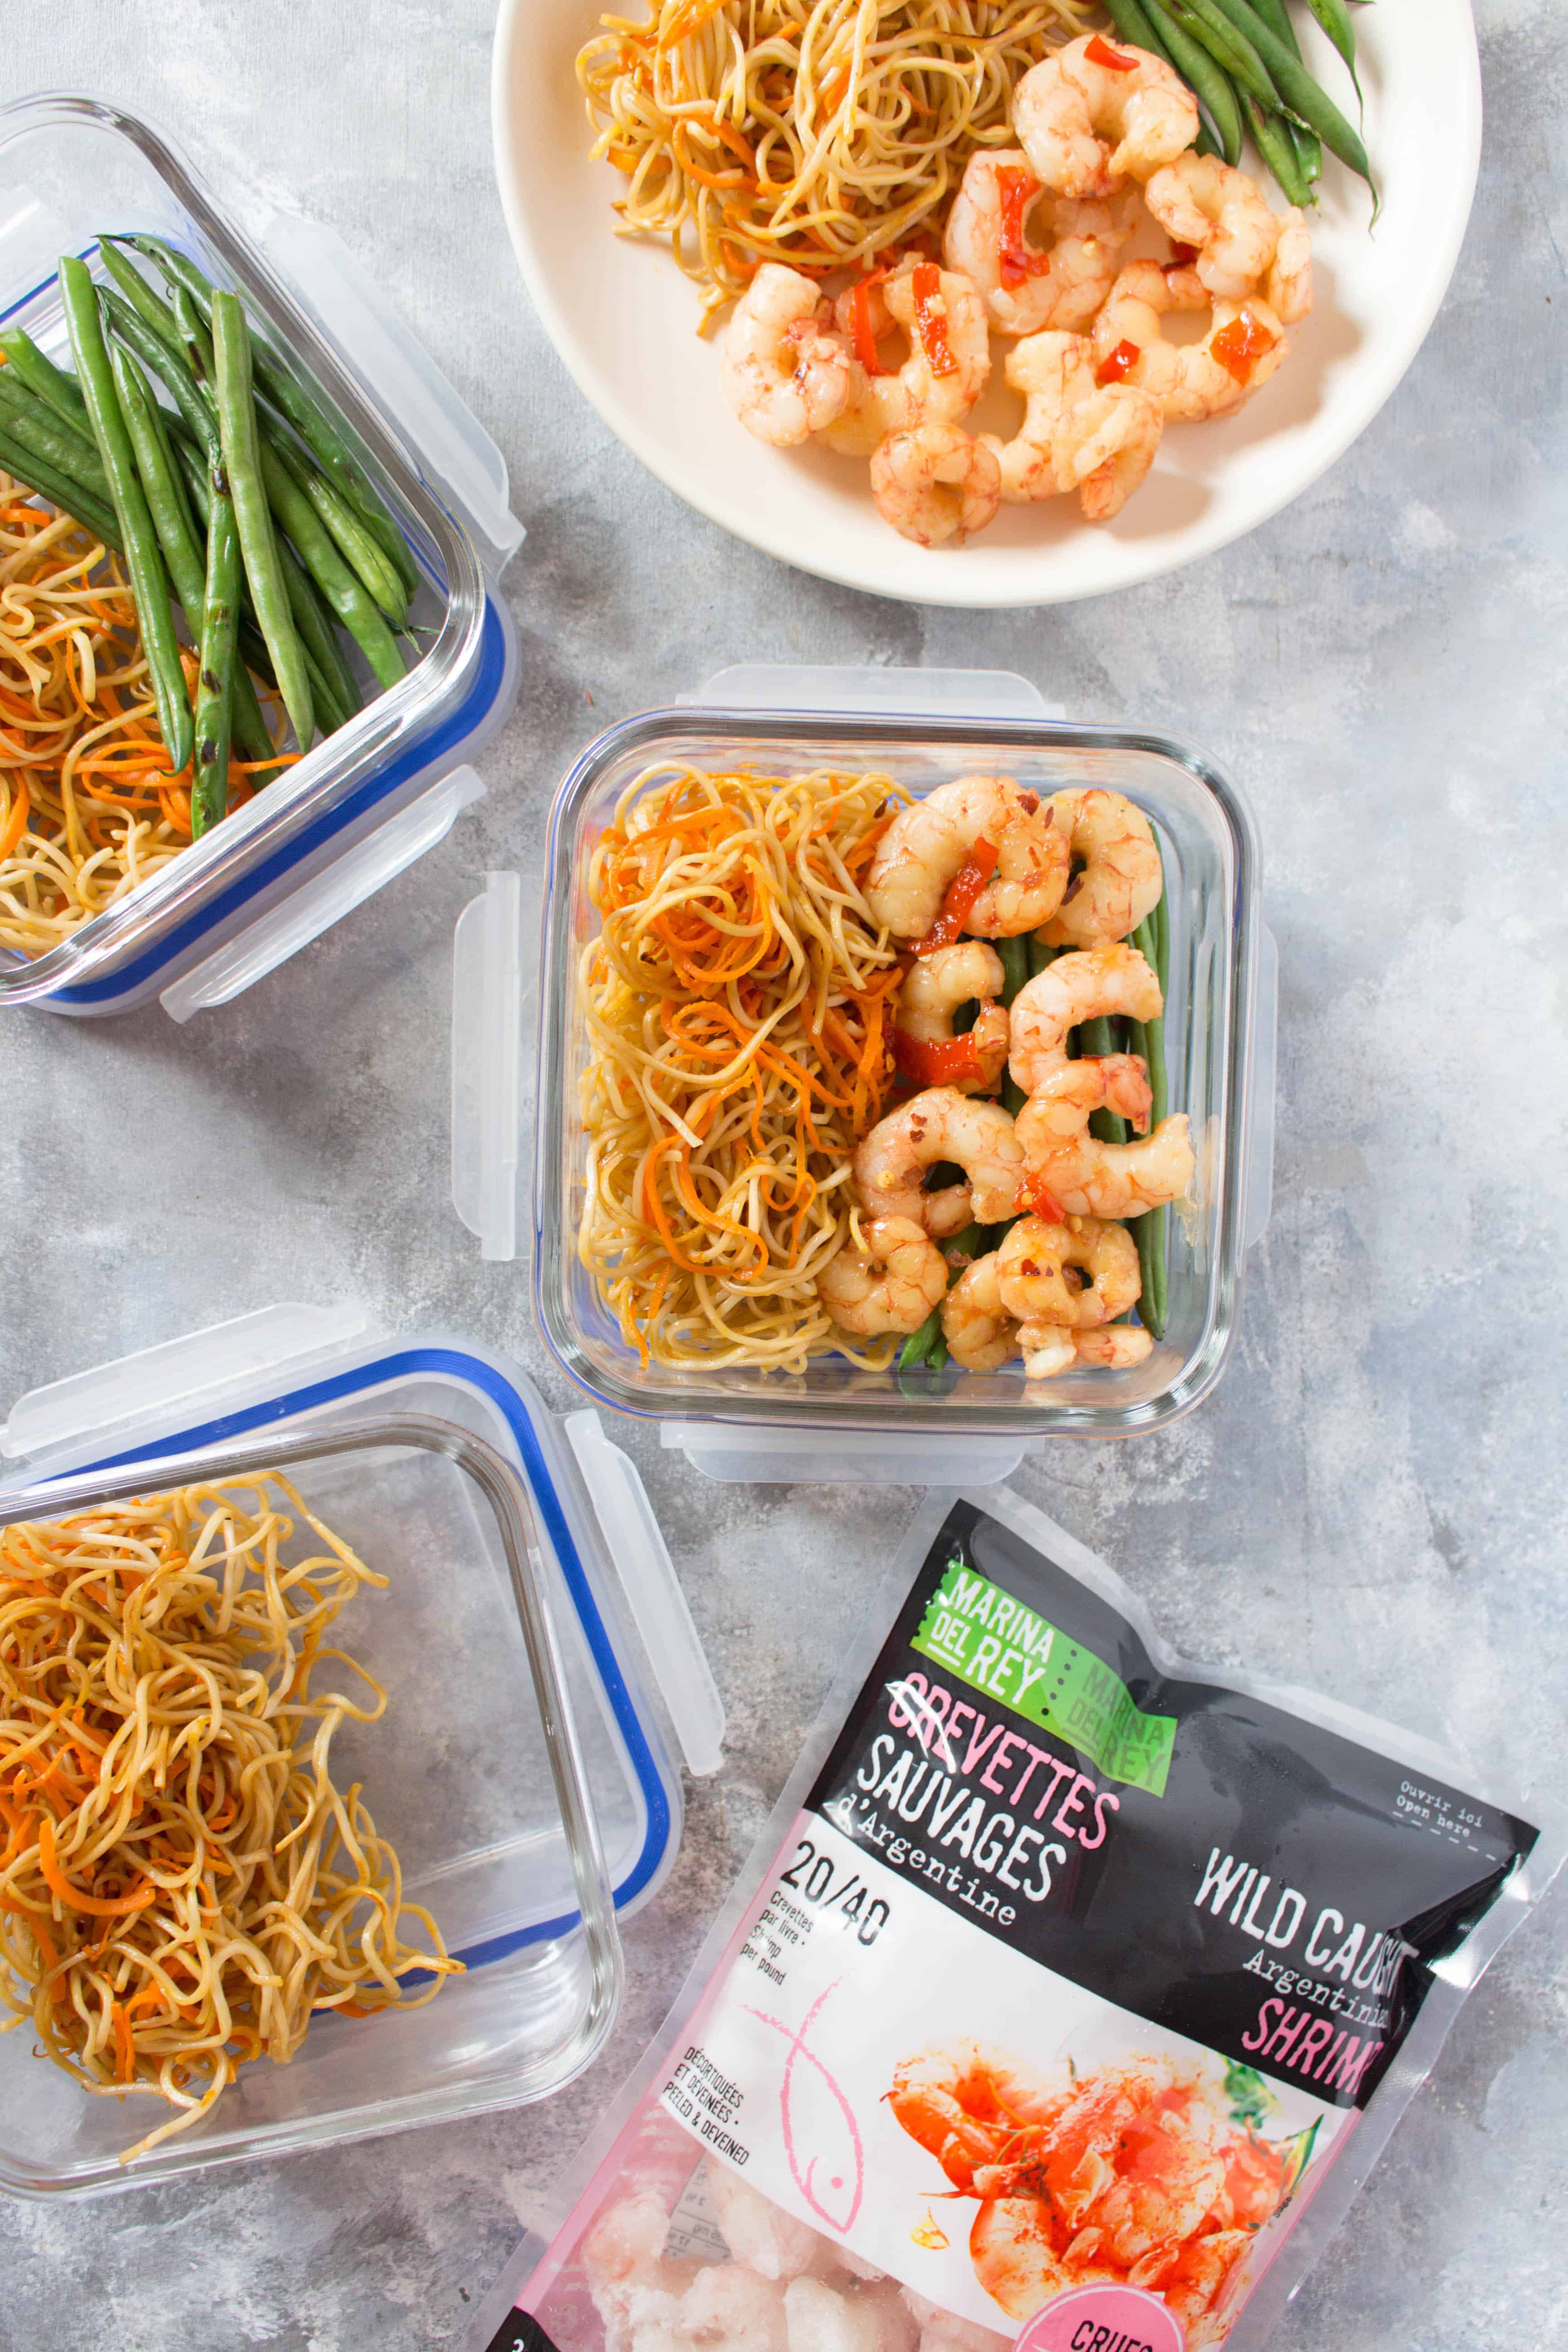 Shrimp with Homemade Sweet and Spicy Chili Sauce Meal Prep